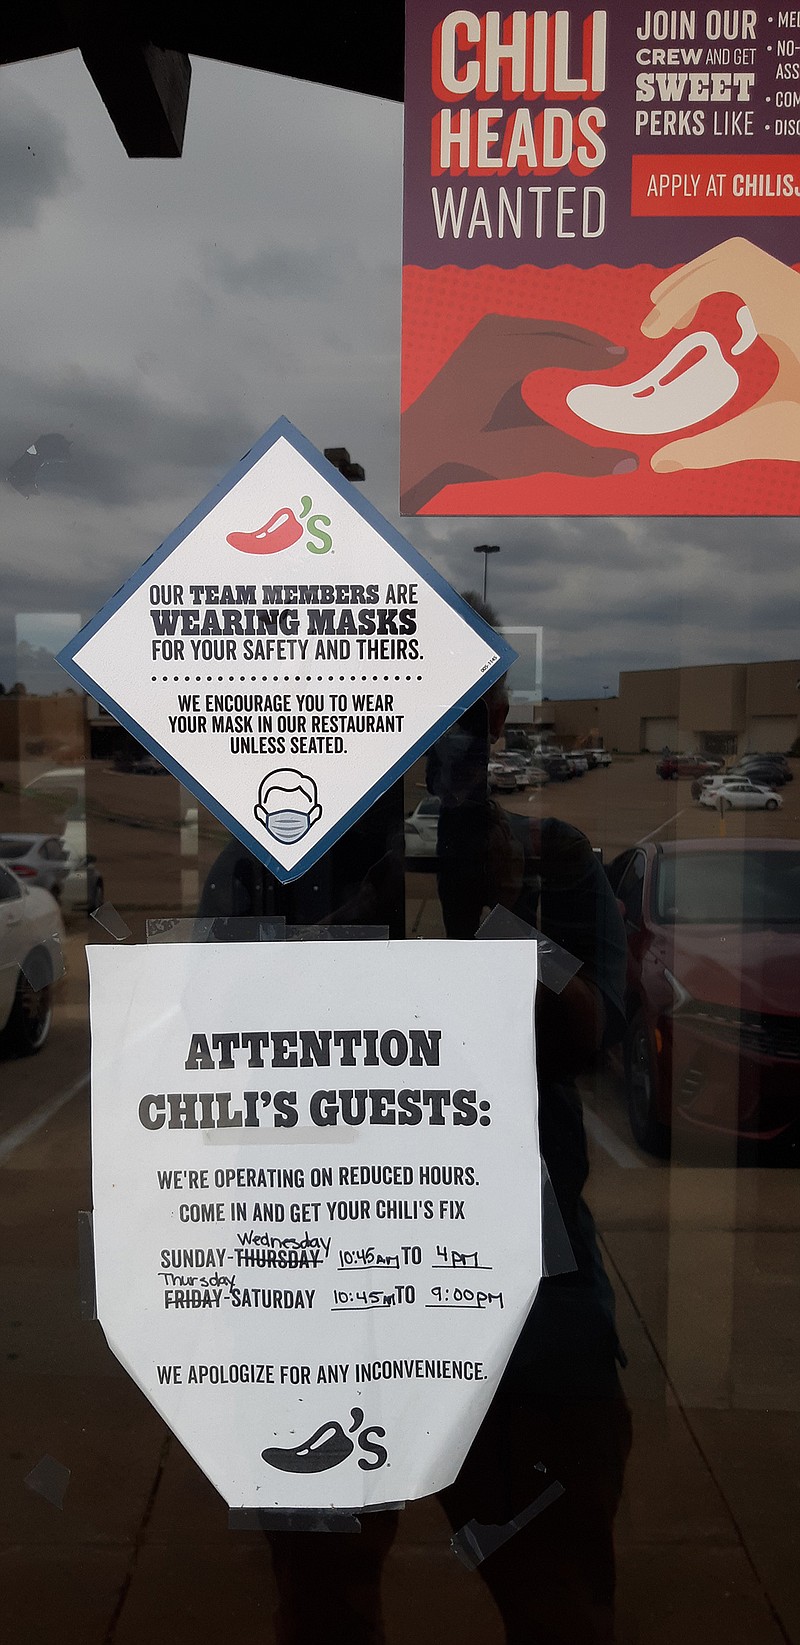 Chili's is one of the local eateries that has reported trouble hiring in the current labor climate, to the point they are operating at reduced shifts.